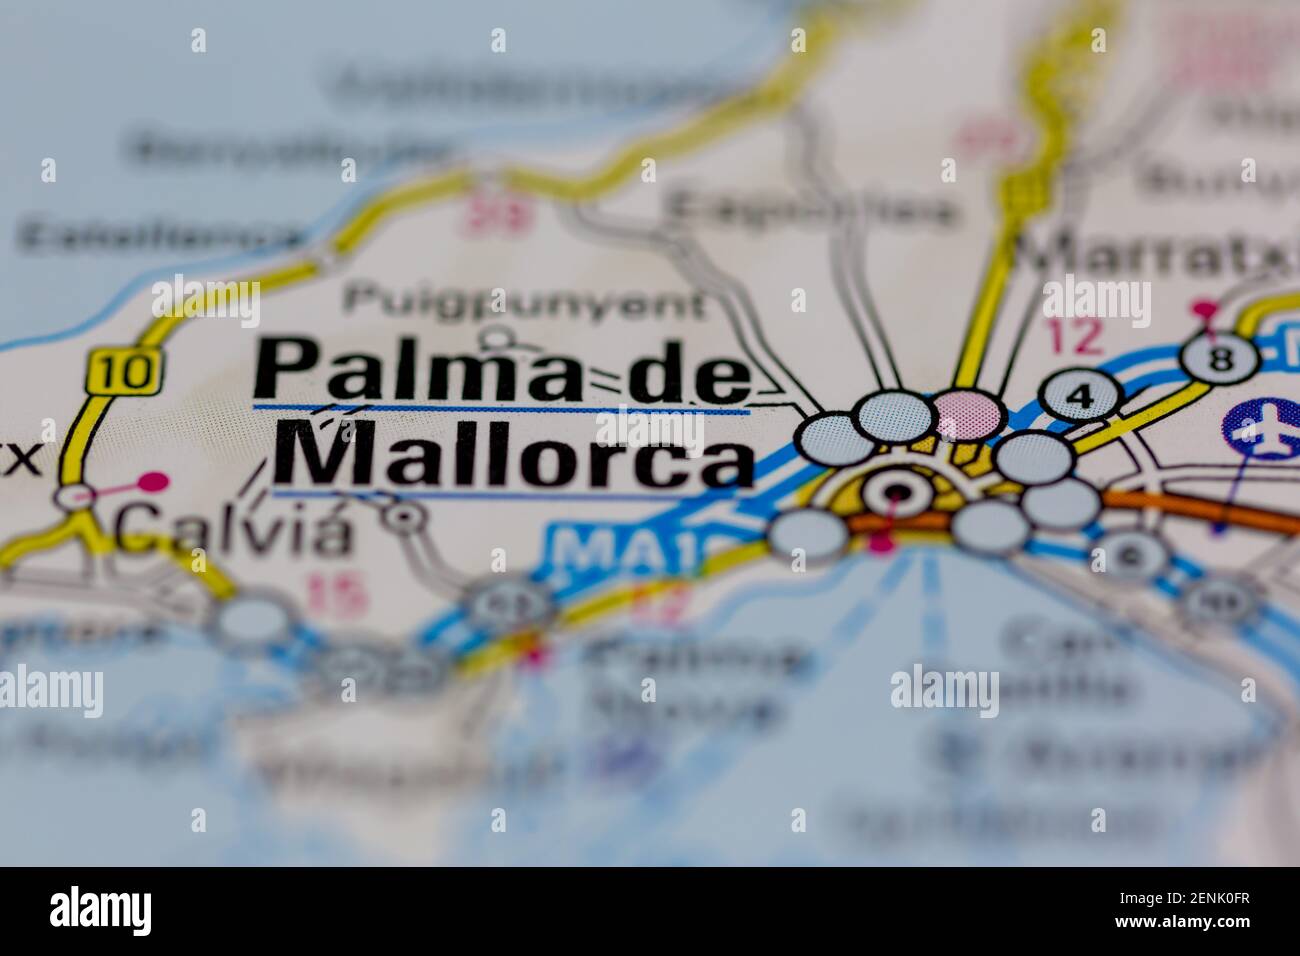 Palma De Mallorca Shown On A Road Map Or A Geography Map 2ENK0FR 